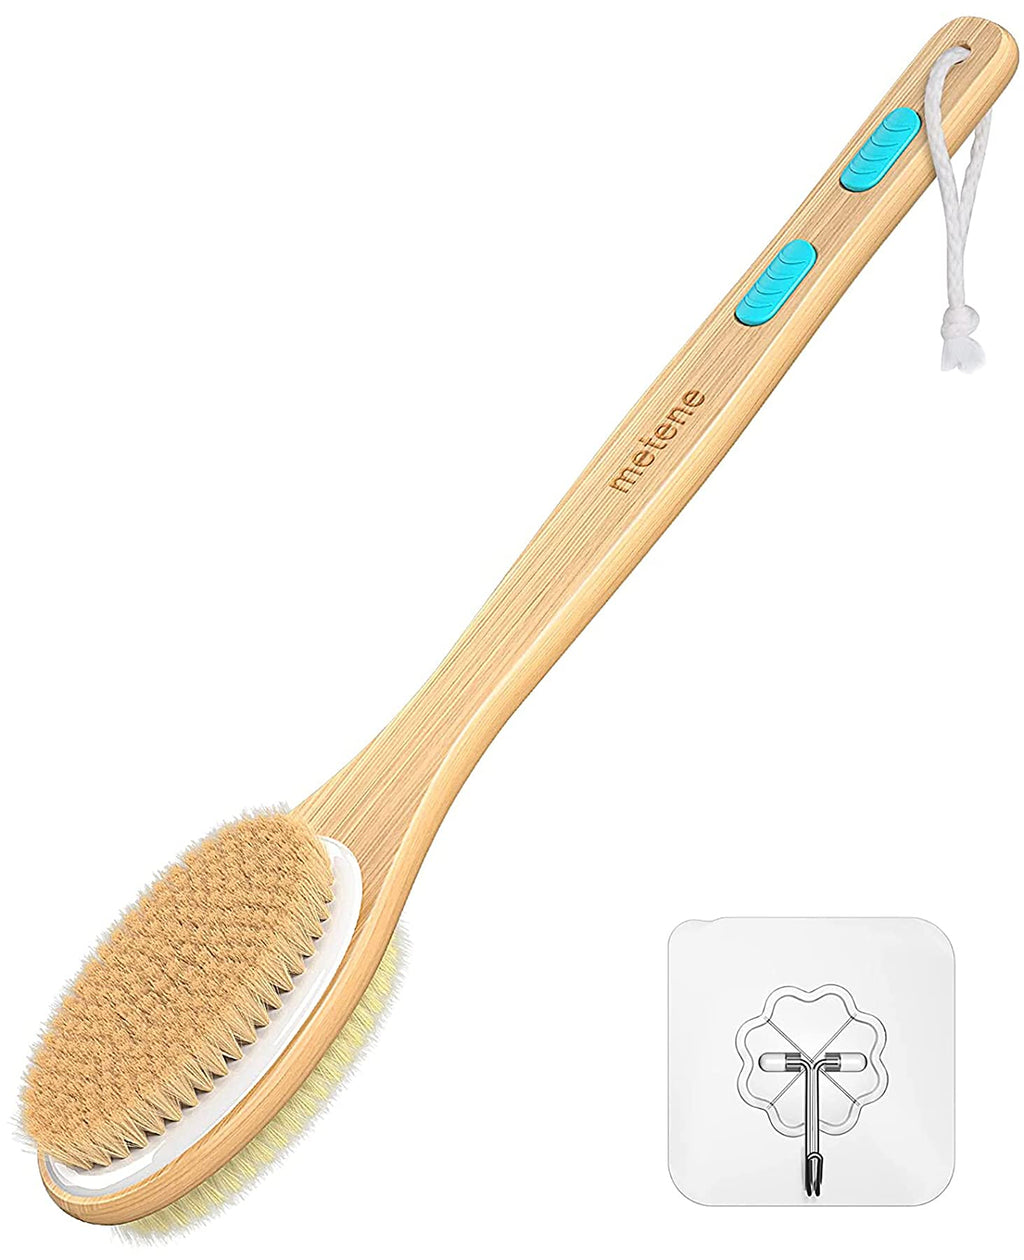 [Australia] - Metene Back Scrubber for Shower, Shower Brush for Exfoliating Skin and A Soft Scrub, Double-sided Body Brush Head for Wet or Dry Brushing, Long Wooden Handle Cleans the Body Easily 